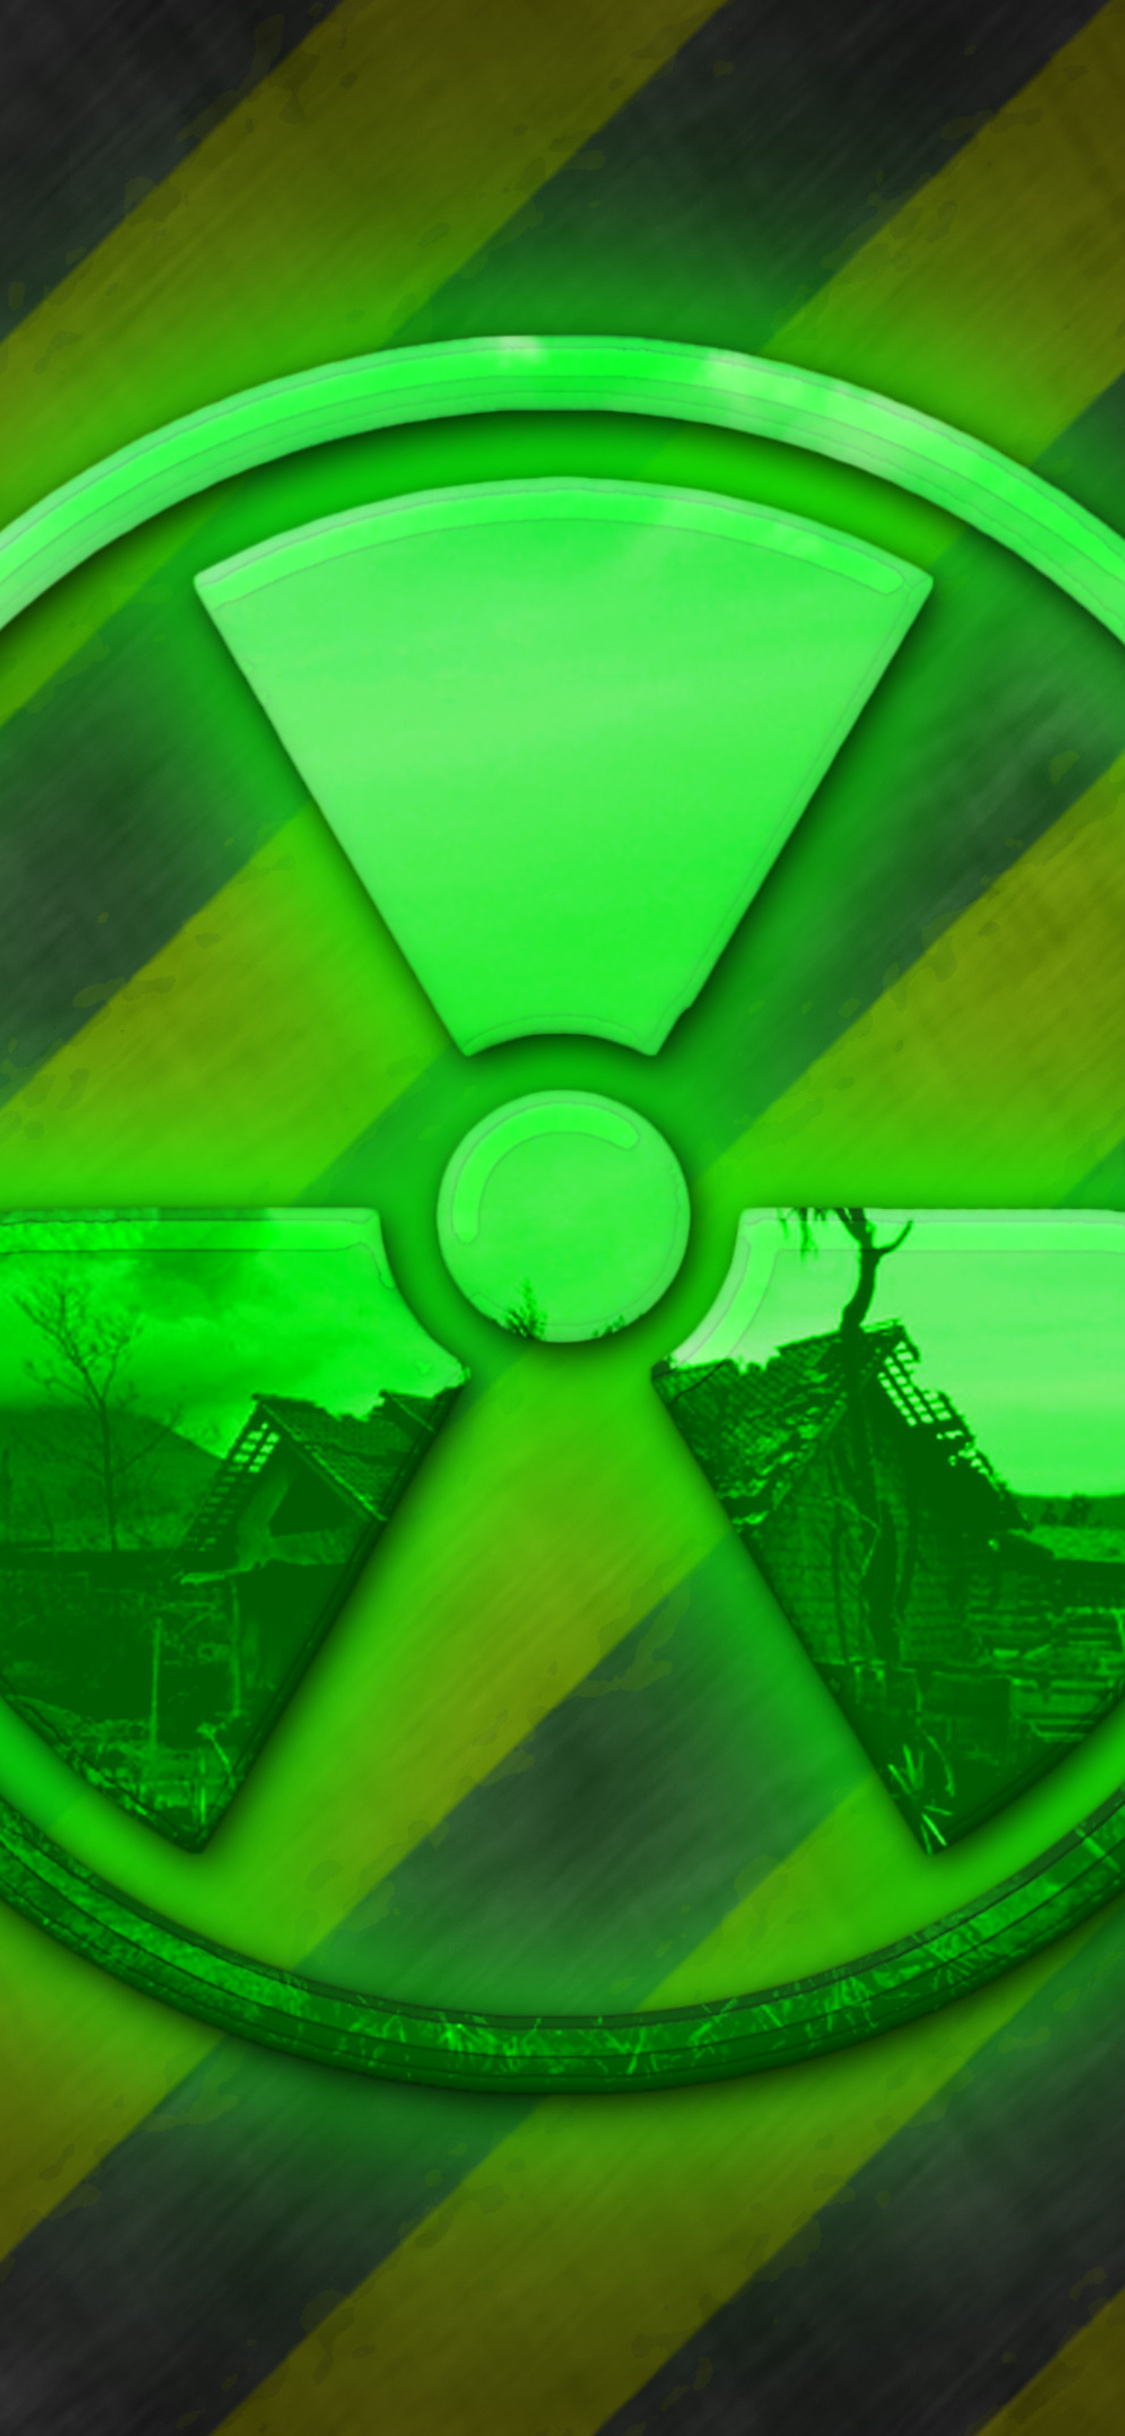 1125x2436 Radioactive Iphone XS,Iphone 10,Iphone X HD 4k Wallpapers, Images, Backgrounds, Photos and Pictures